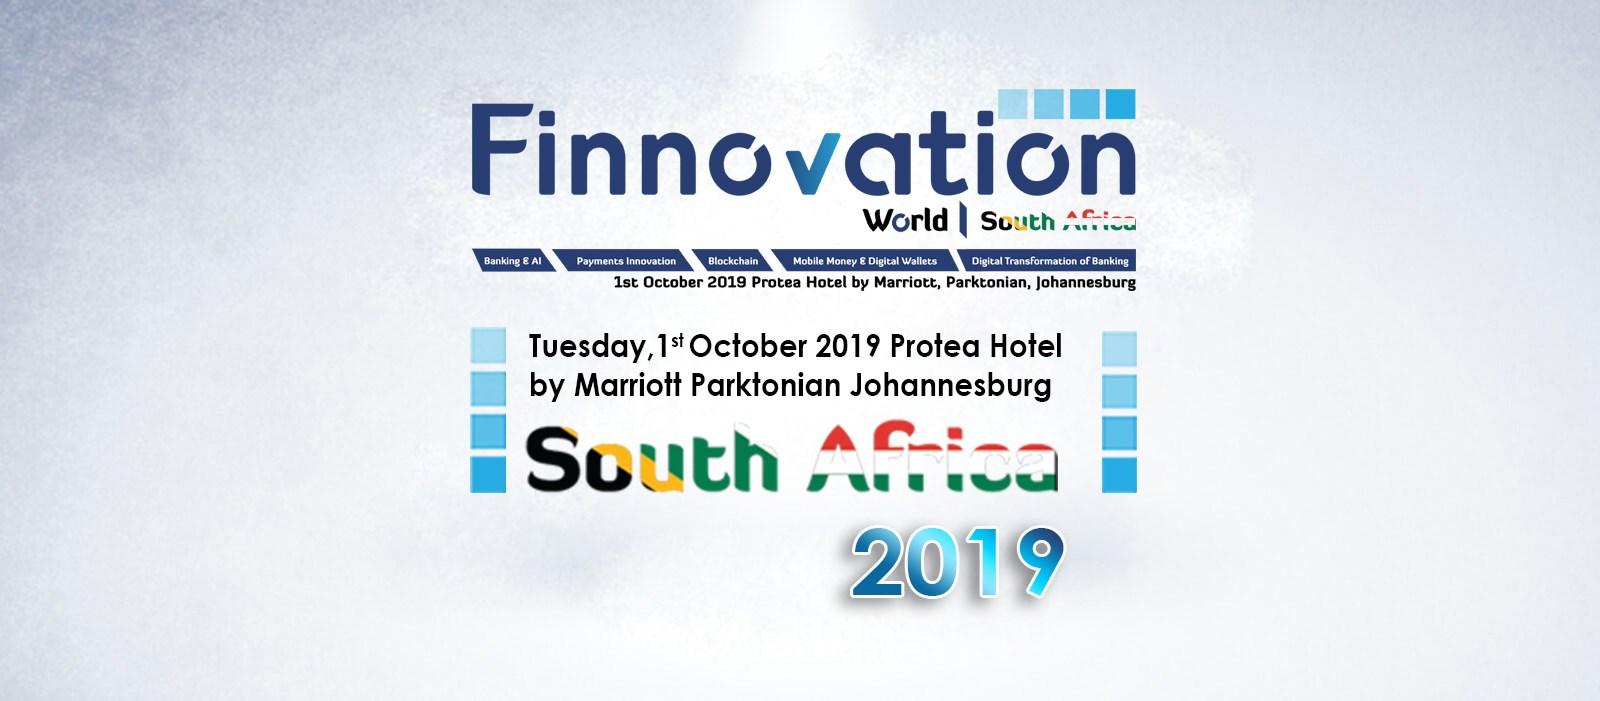 Product Cortex Group & MIIA At Finnovation Africa: South Africa 2019 - Cortex Group image